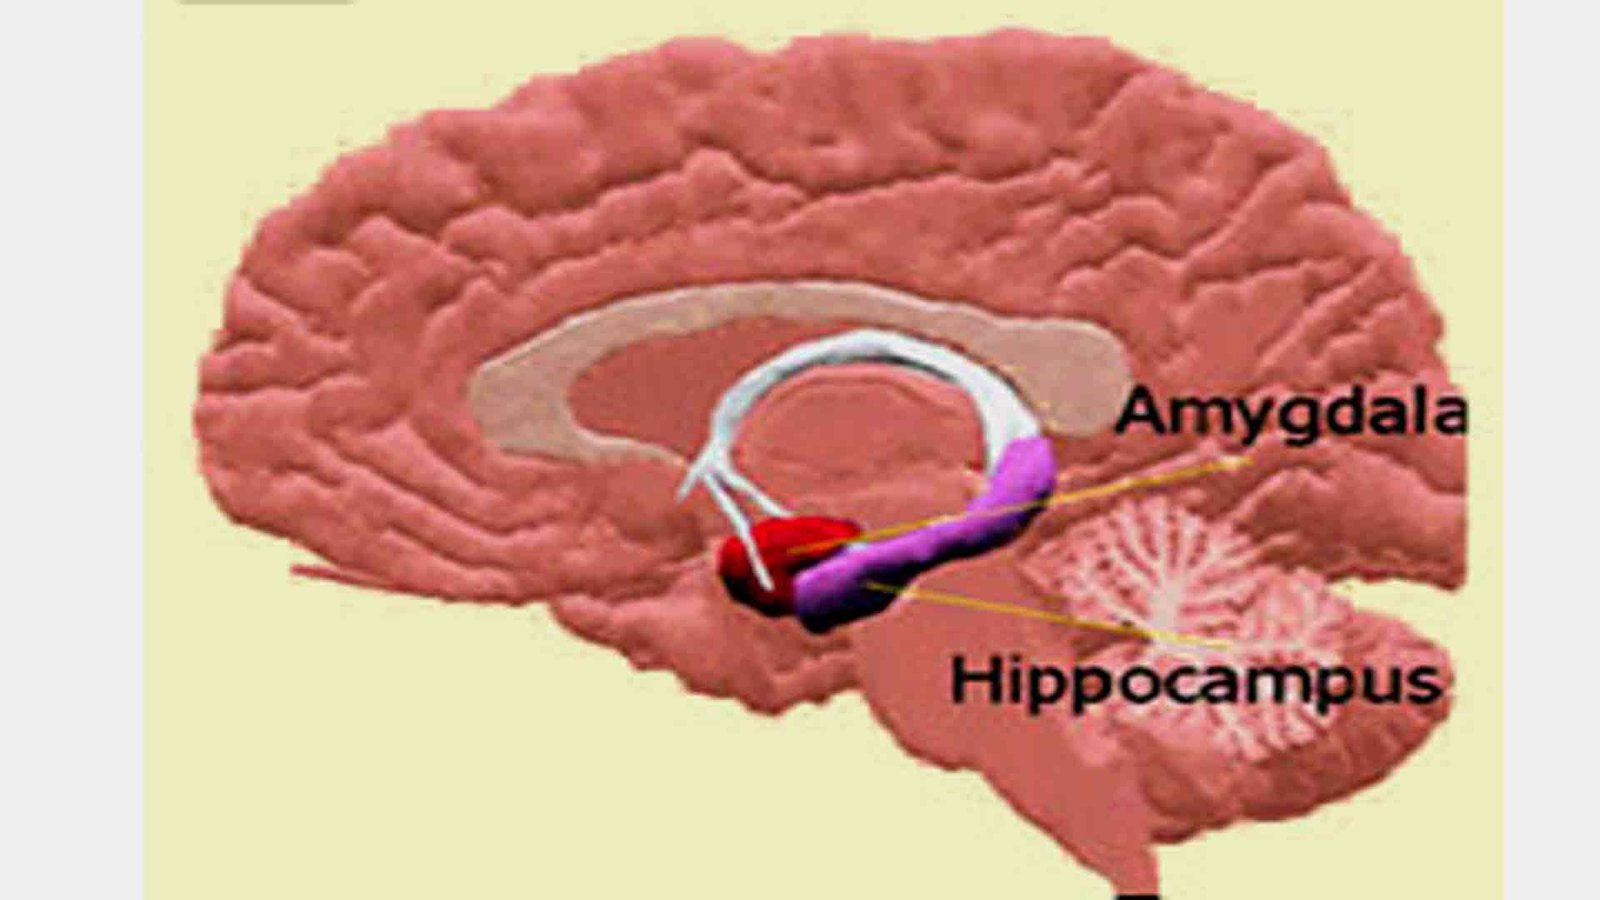 Amygdala-hippocampus in Anxiety Disorders from Neurofeedback management perspective